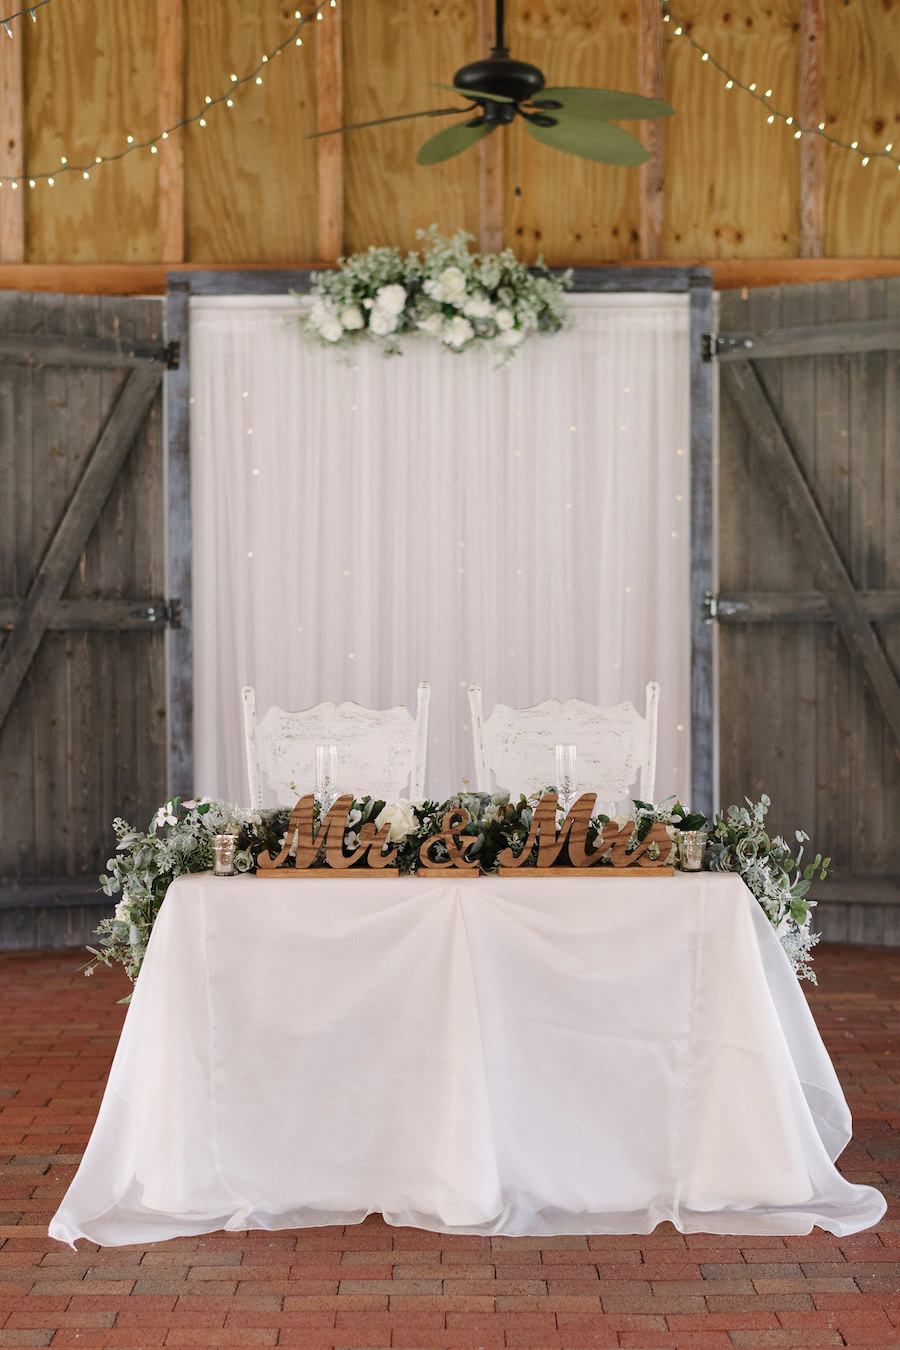 Rustic Wedding Sweetheart Table with White Linens, Cascading Dusty Miller Greenery and Wooden Mr and Mrs Centerpiece at Tampa Bay Wedding Venue Cross Creek Ranch